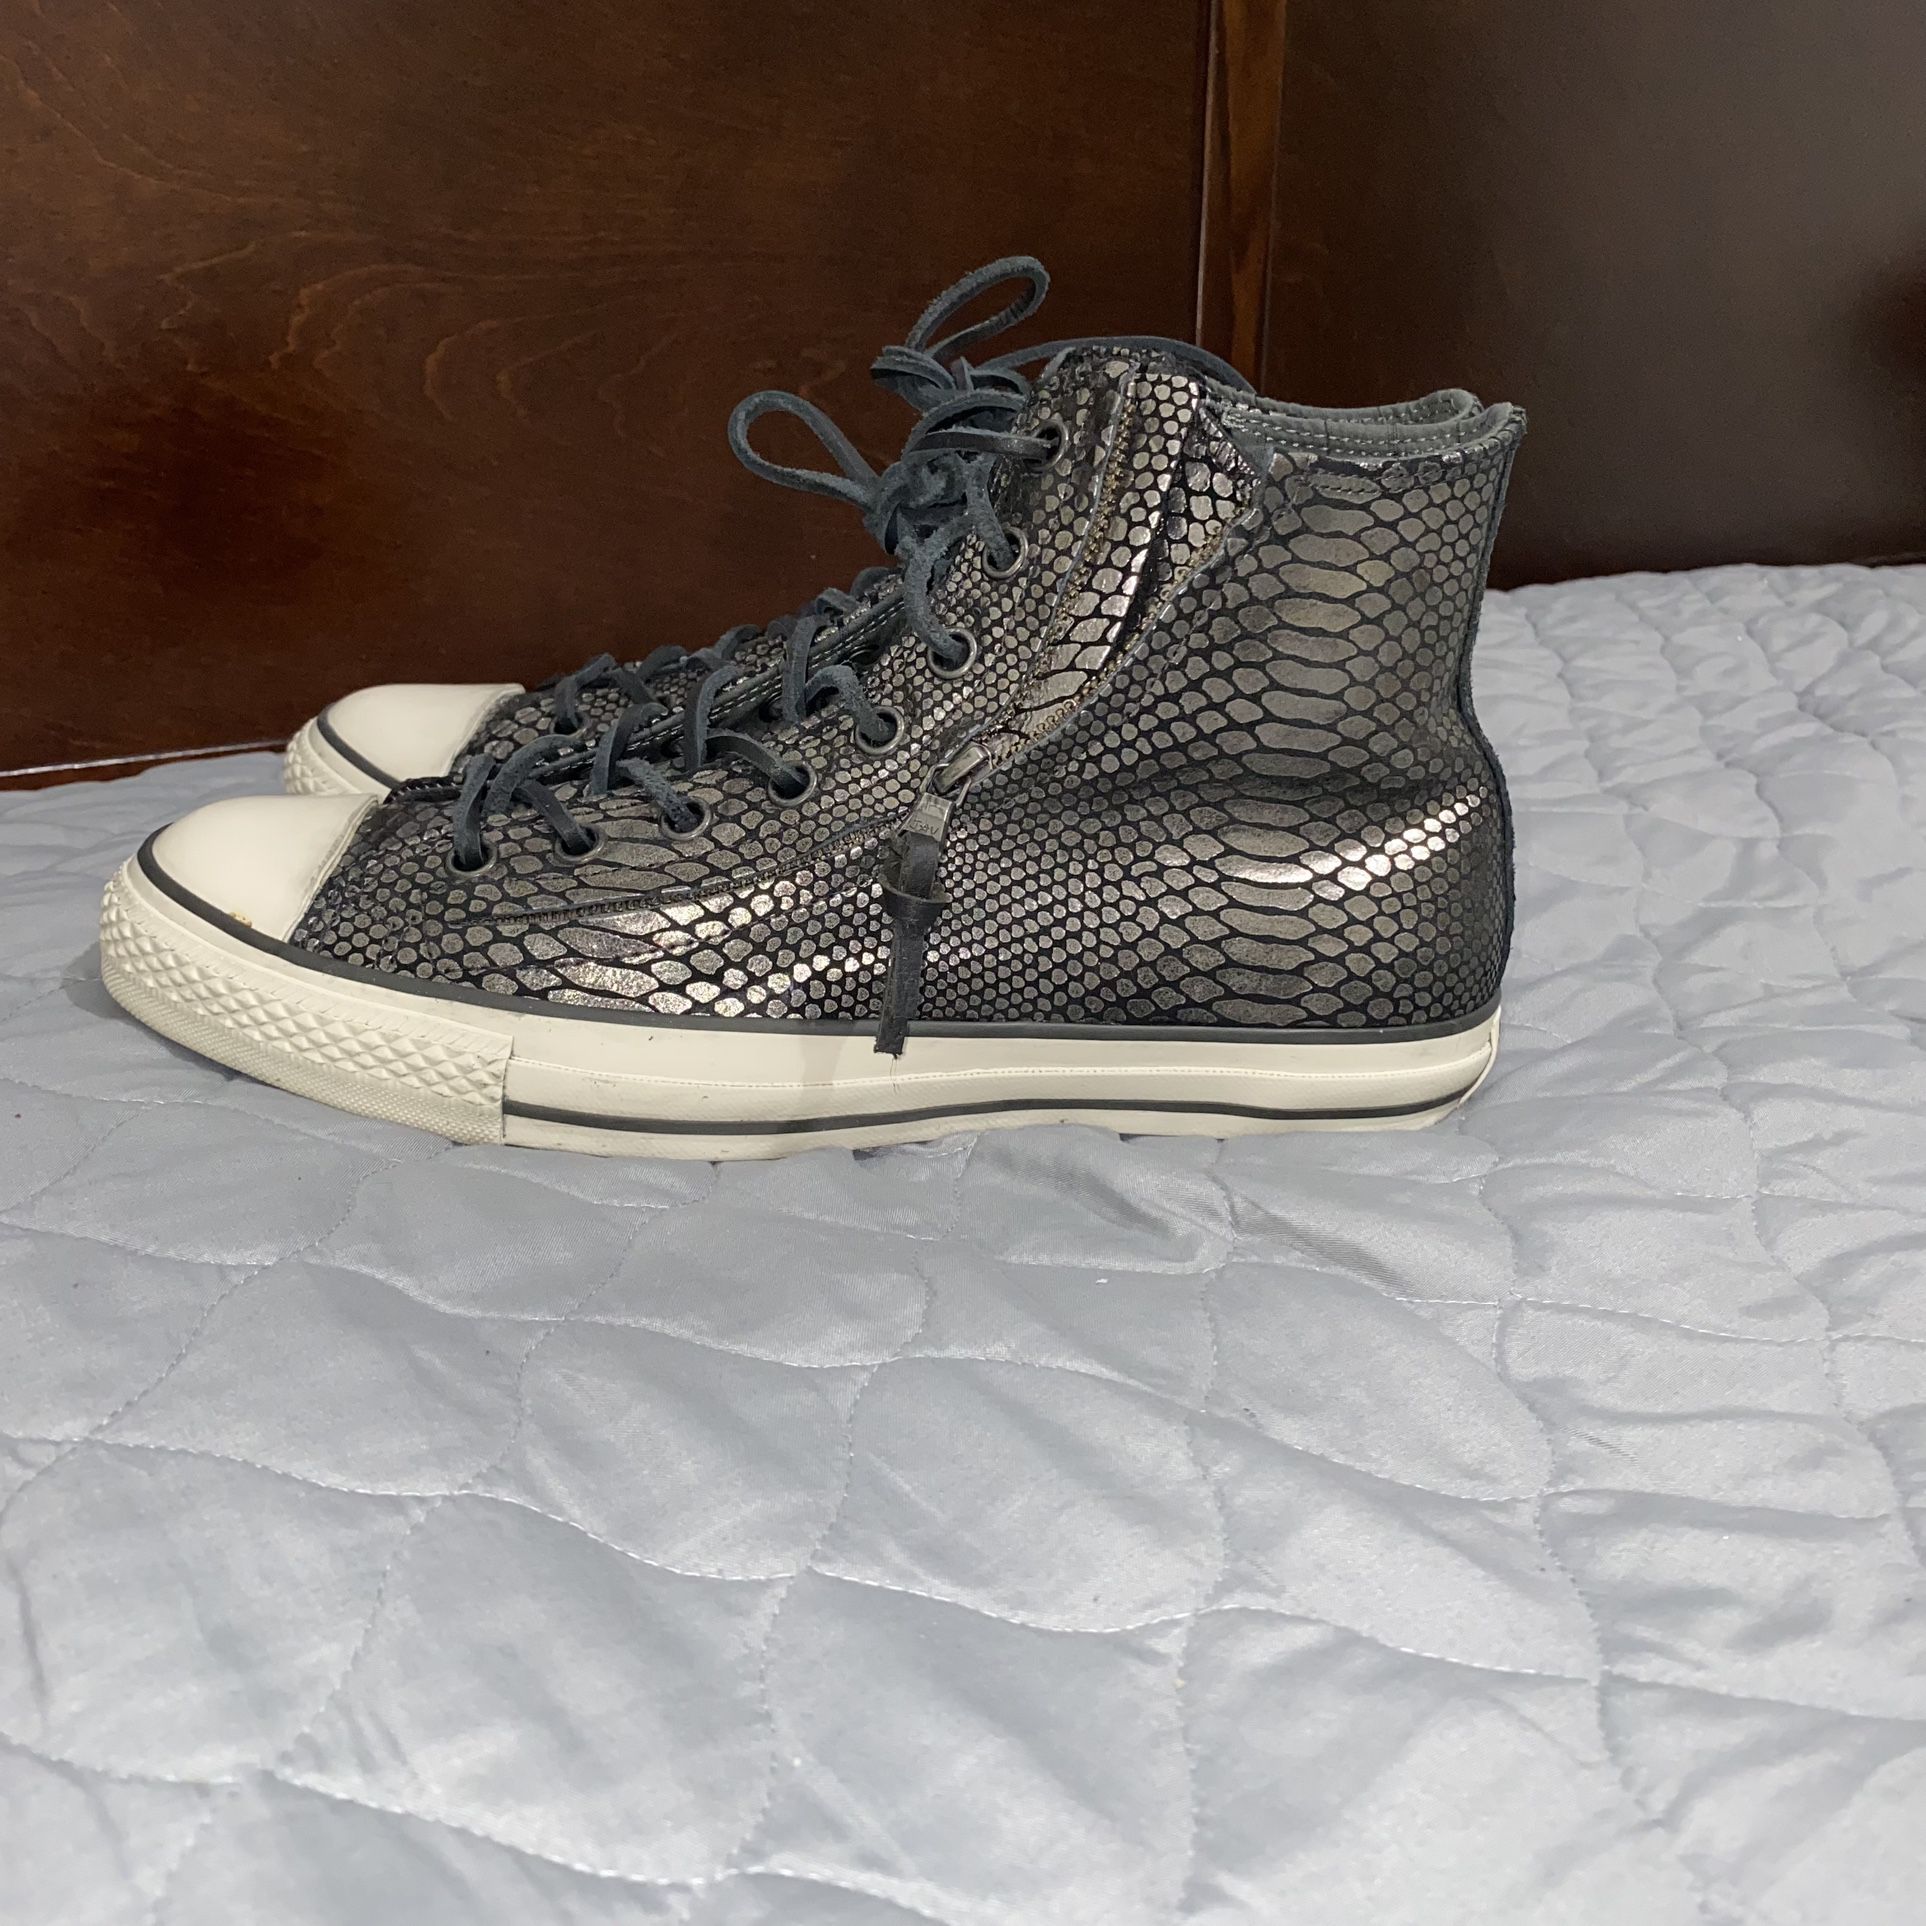 Converse Taylor All Star John Varvatos Silver & Snake Skin Design Sneakers With Zippers And Full Lace Up!! SZ: Men's 10/Women's 12! for Sale in El Paso, - OfferUp